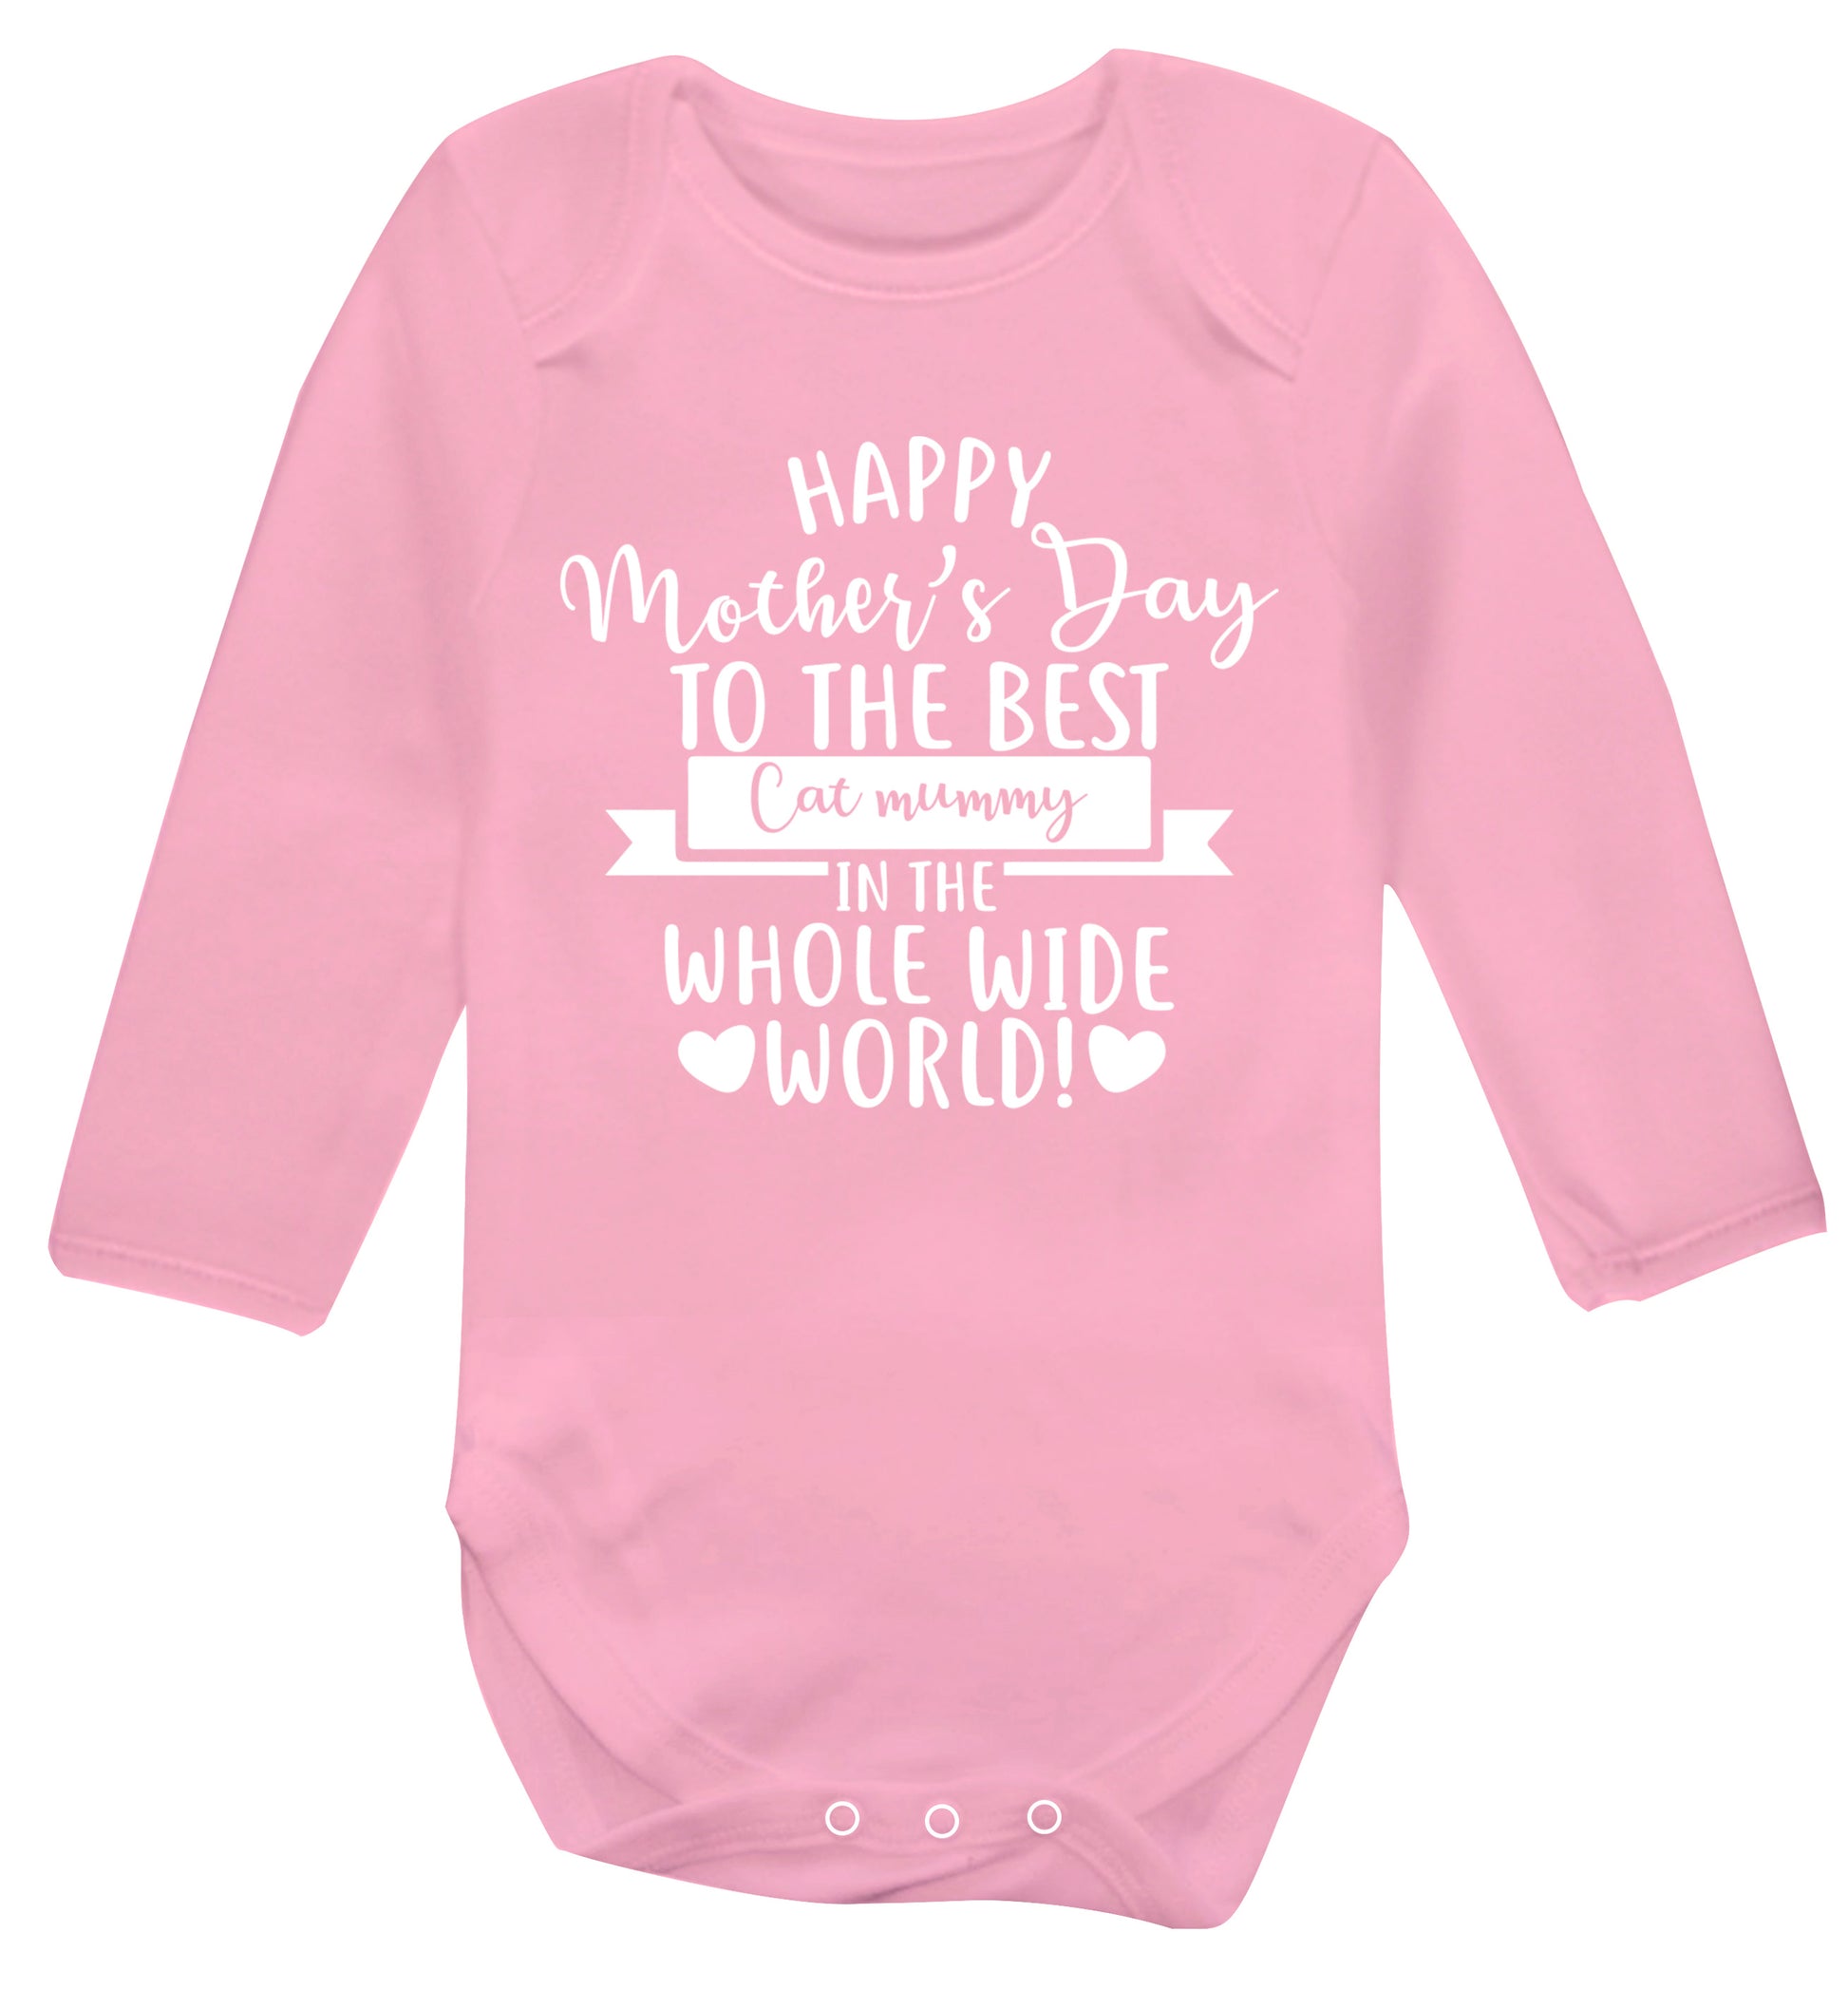 Happy mother's day to the best cat mummy in the world Baby Vest long sleeved pale pink 6-12 months